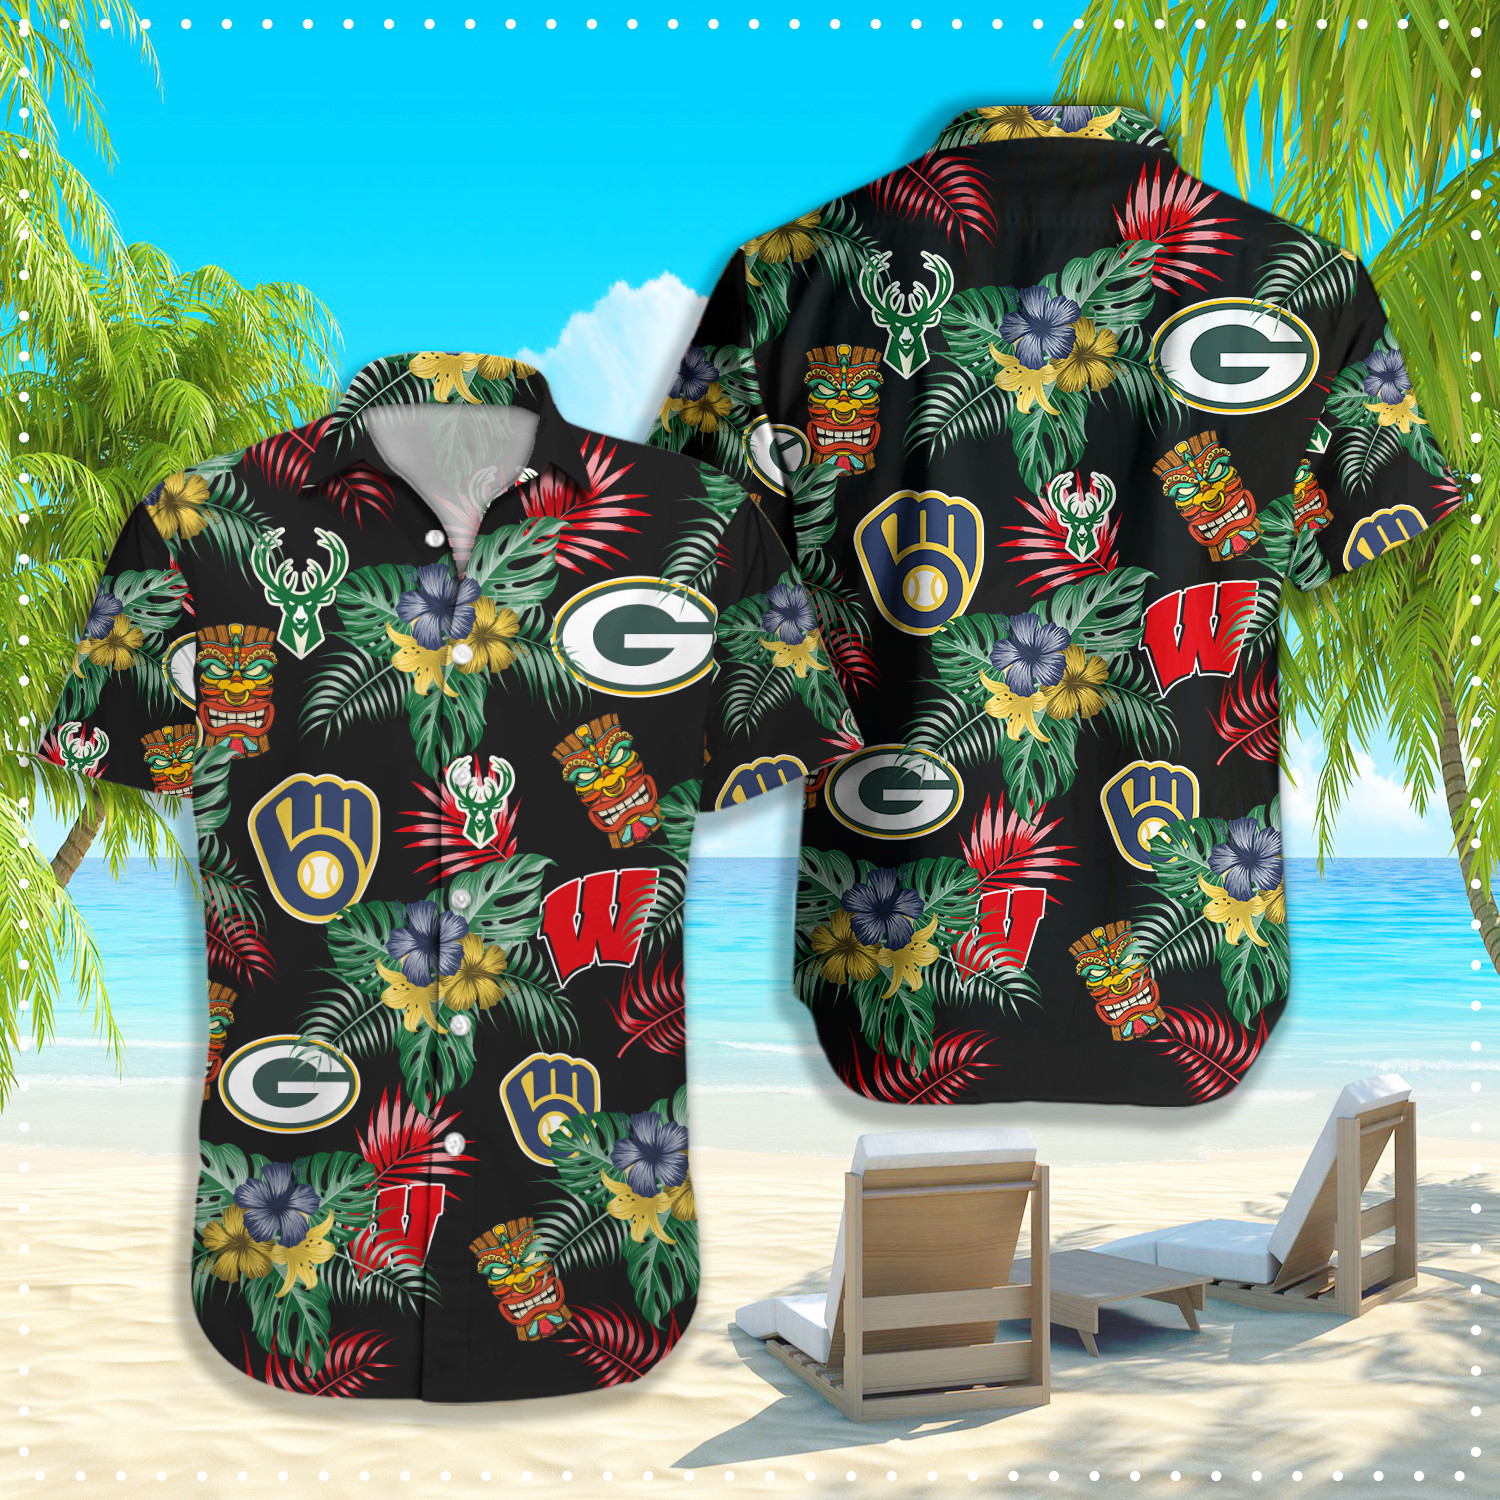 If you're looking for a NHL Hawaiian shirt to wear, don't wait until the last minute! 229